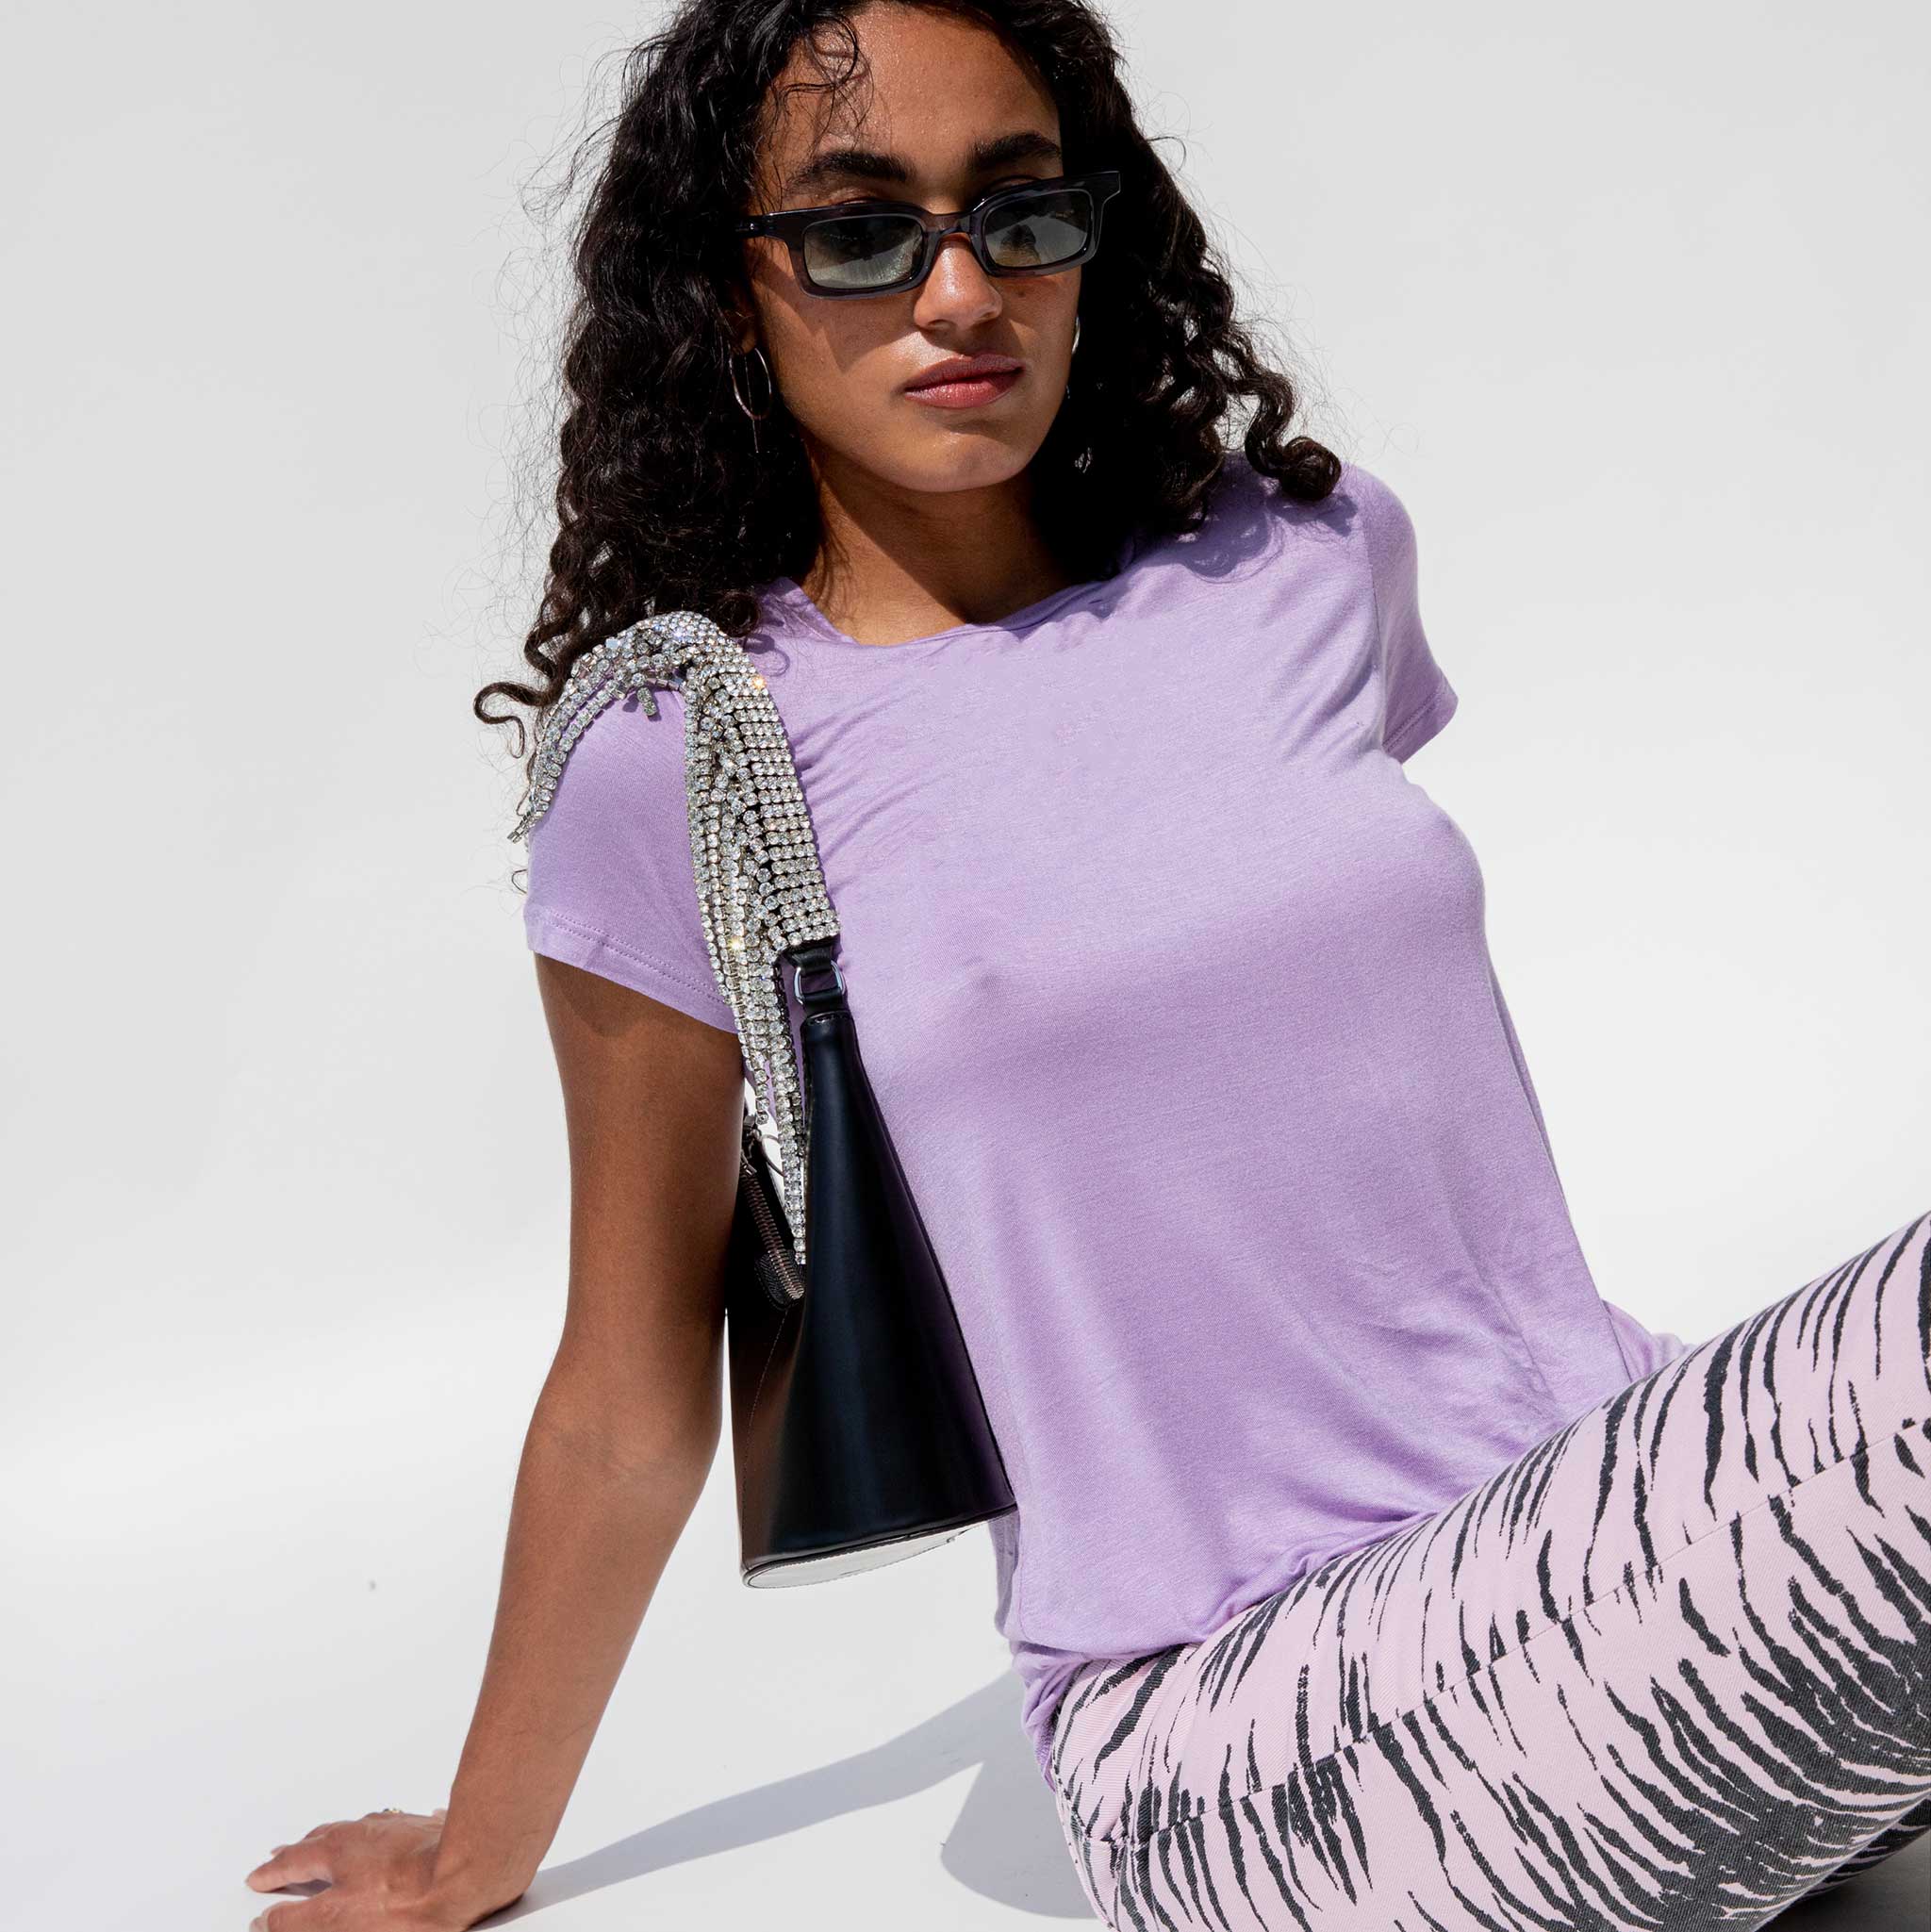 A model sits, leaning back with her hands while wearing the lavender Modal Tee, paired with zebra print pink jeans and a crystal-embellished shoulder bag.